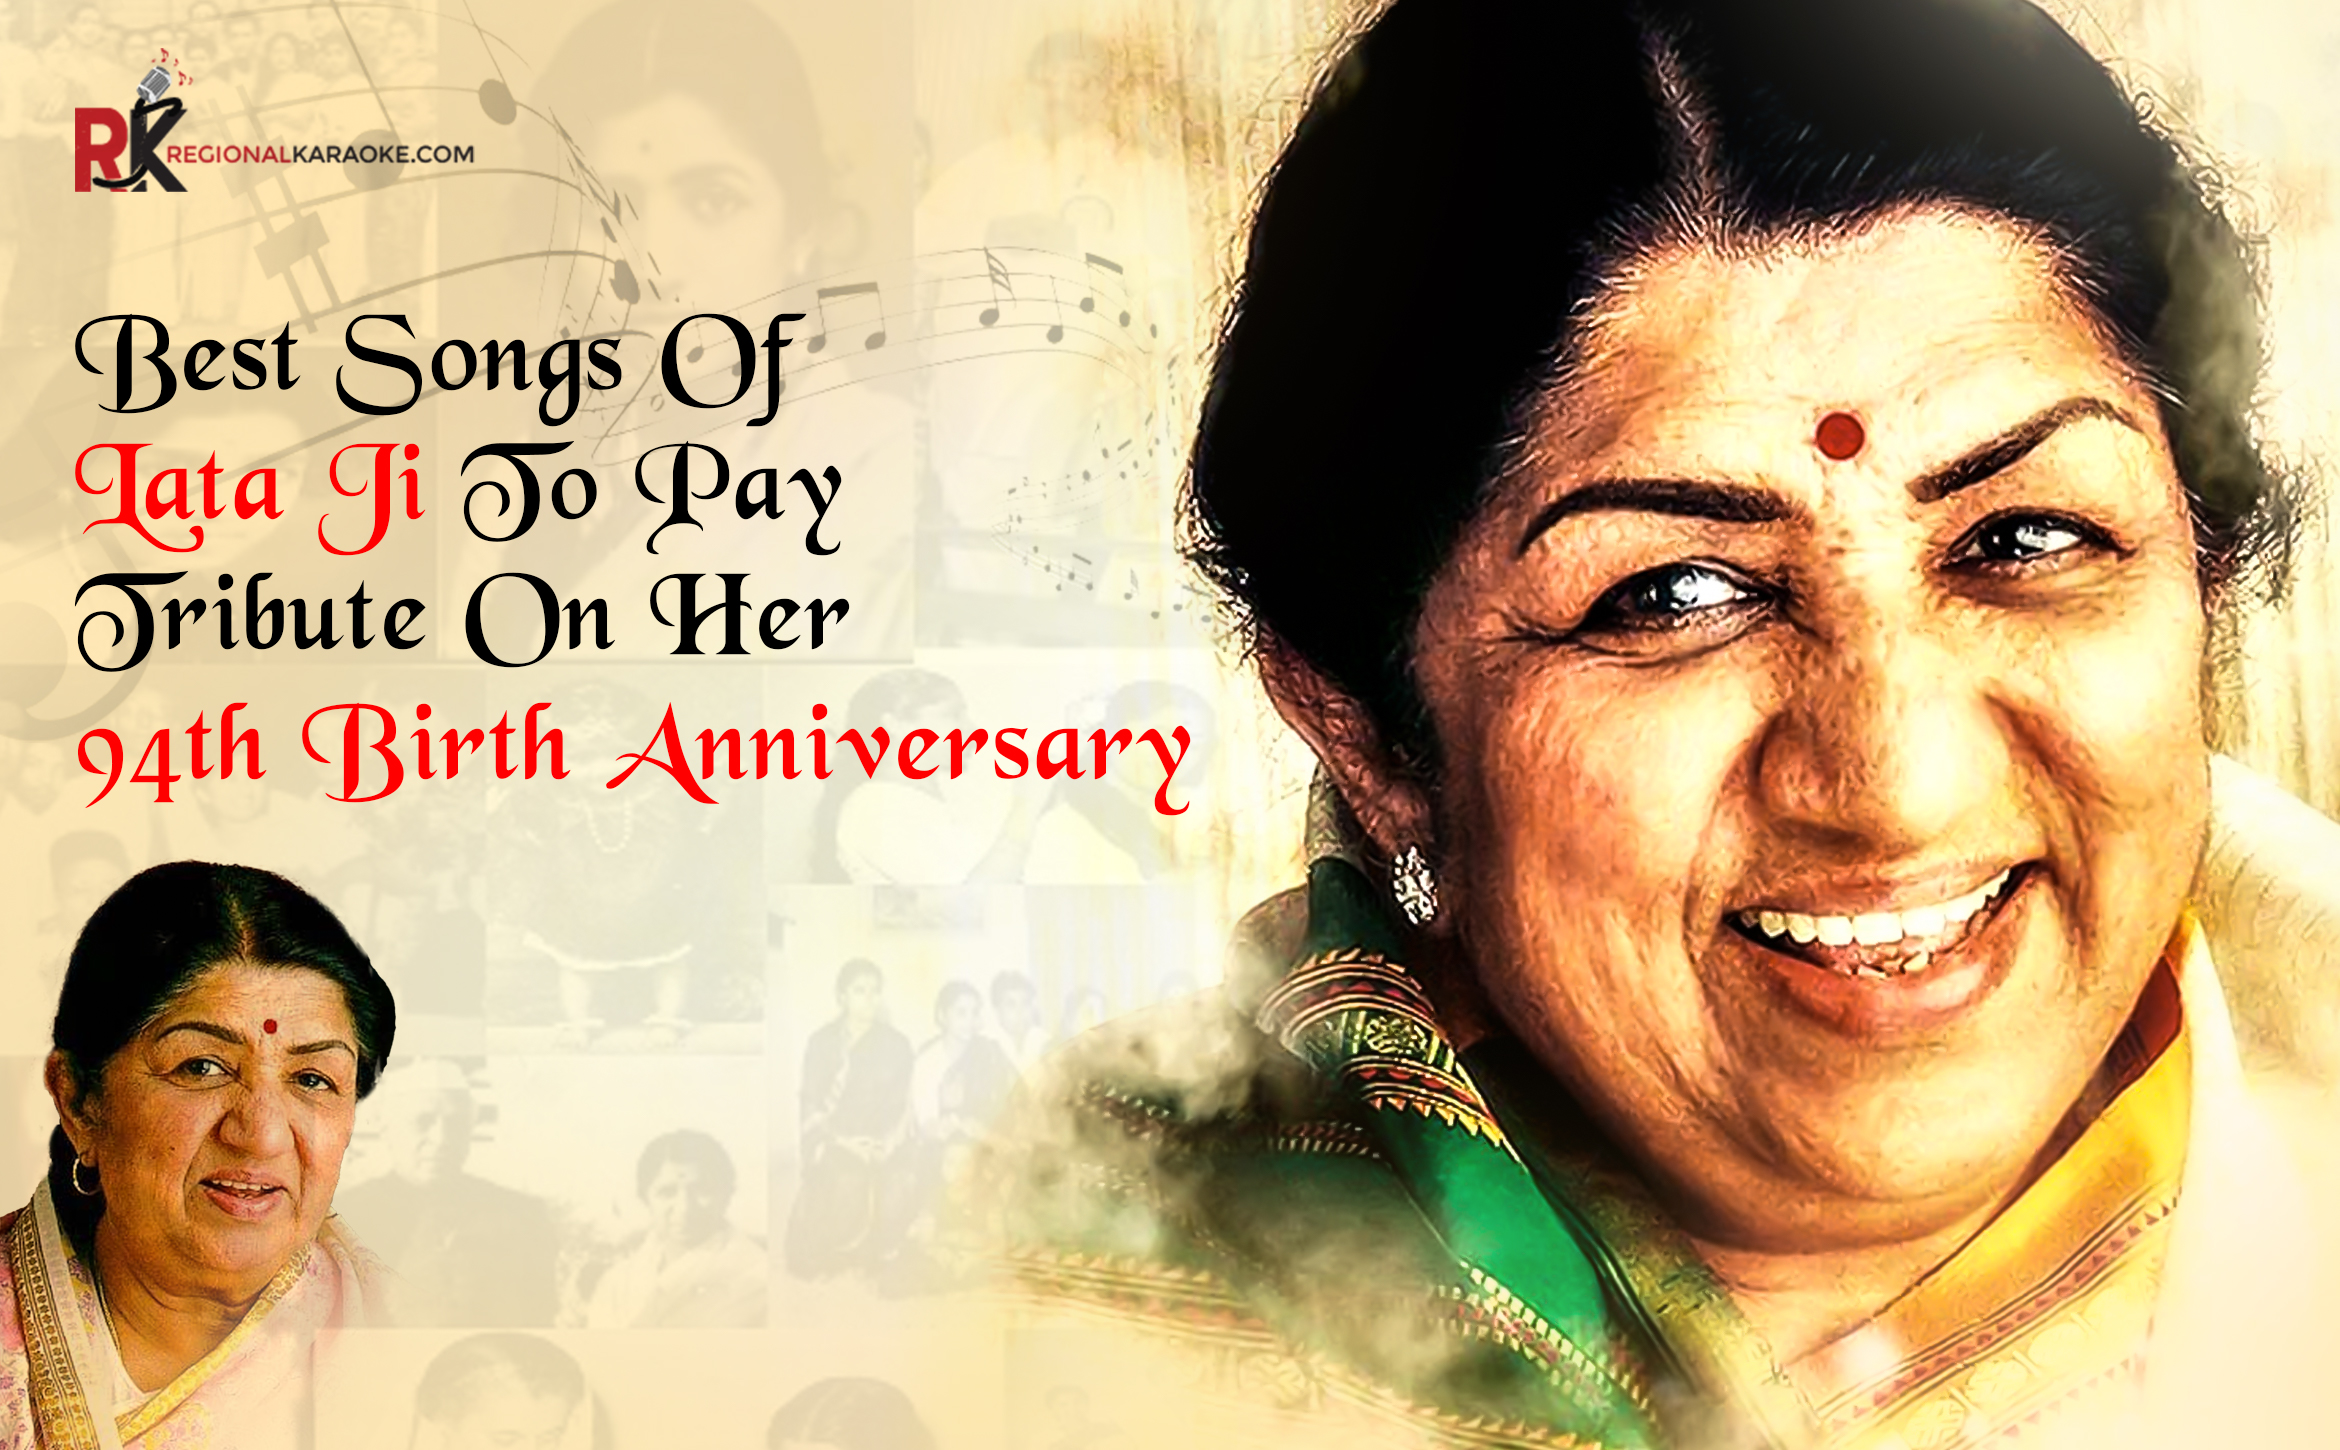 Best Songs Of Lata Ji To Pay Tribute On Her 94th Birth Anniversary